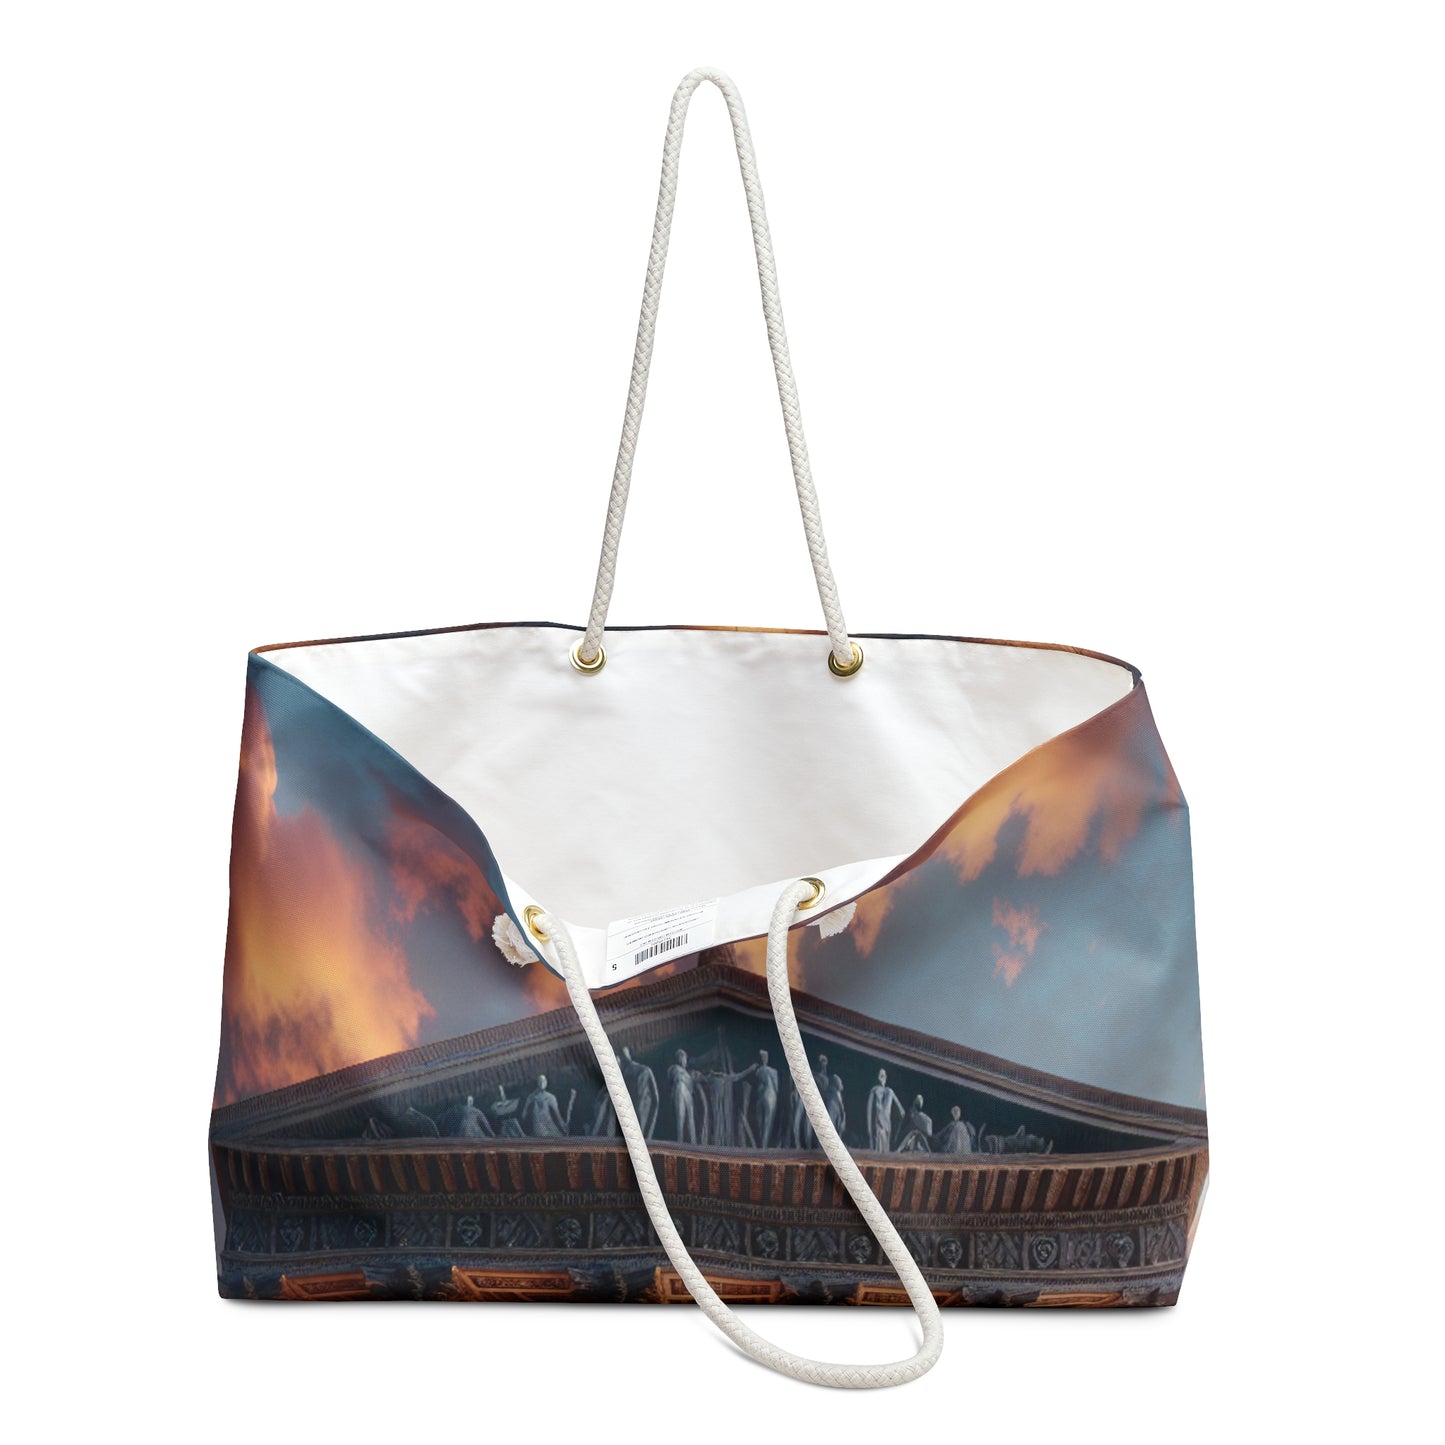 "Warm Glow of the Grecian Temple" - The Alien Weekender Bag Neoclassicism Style